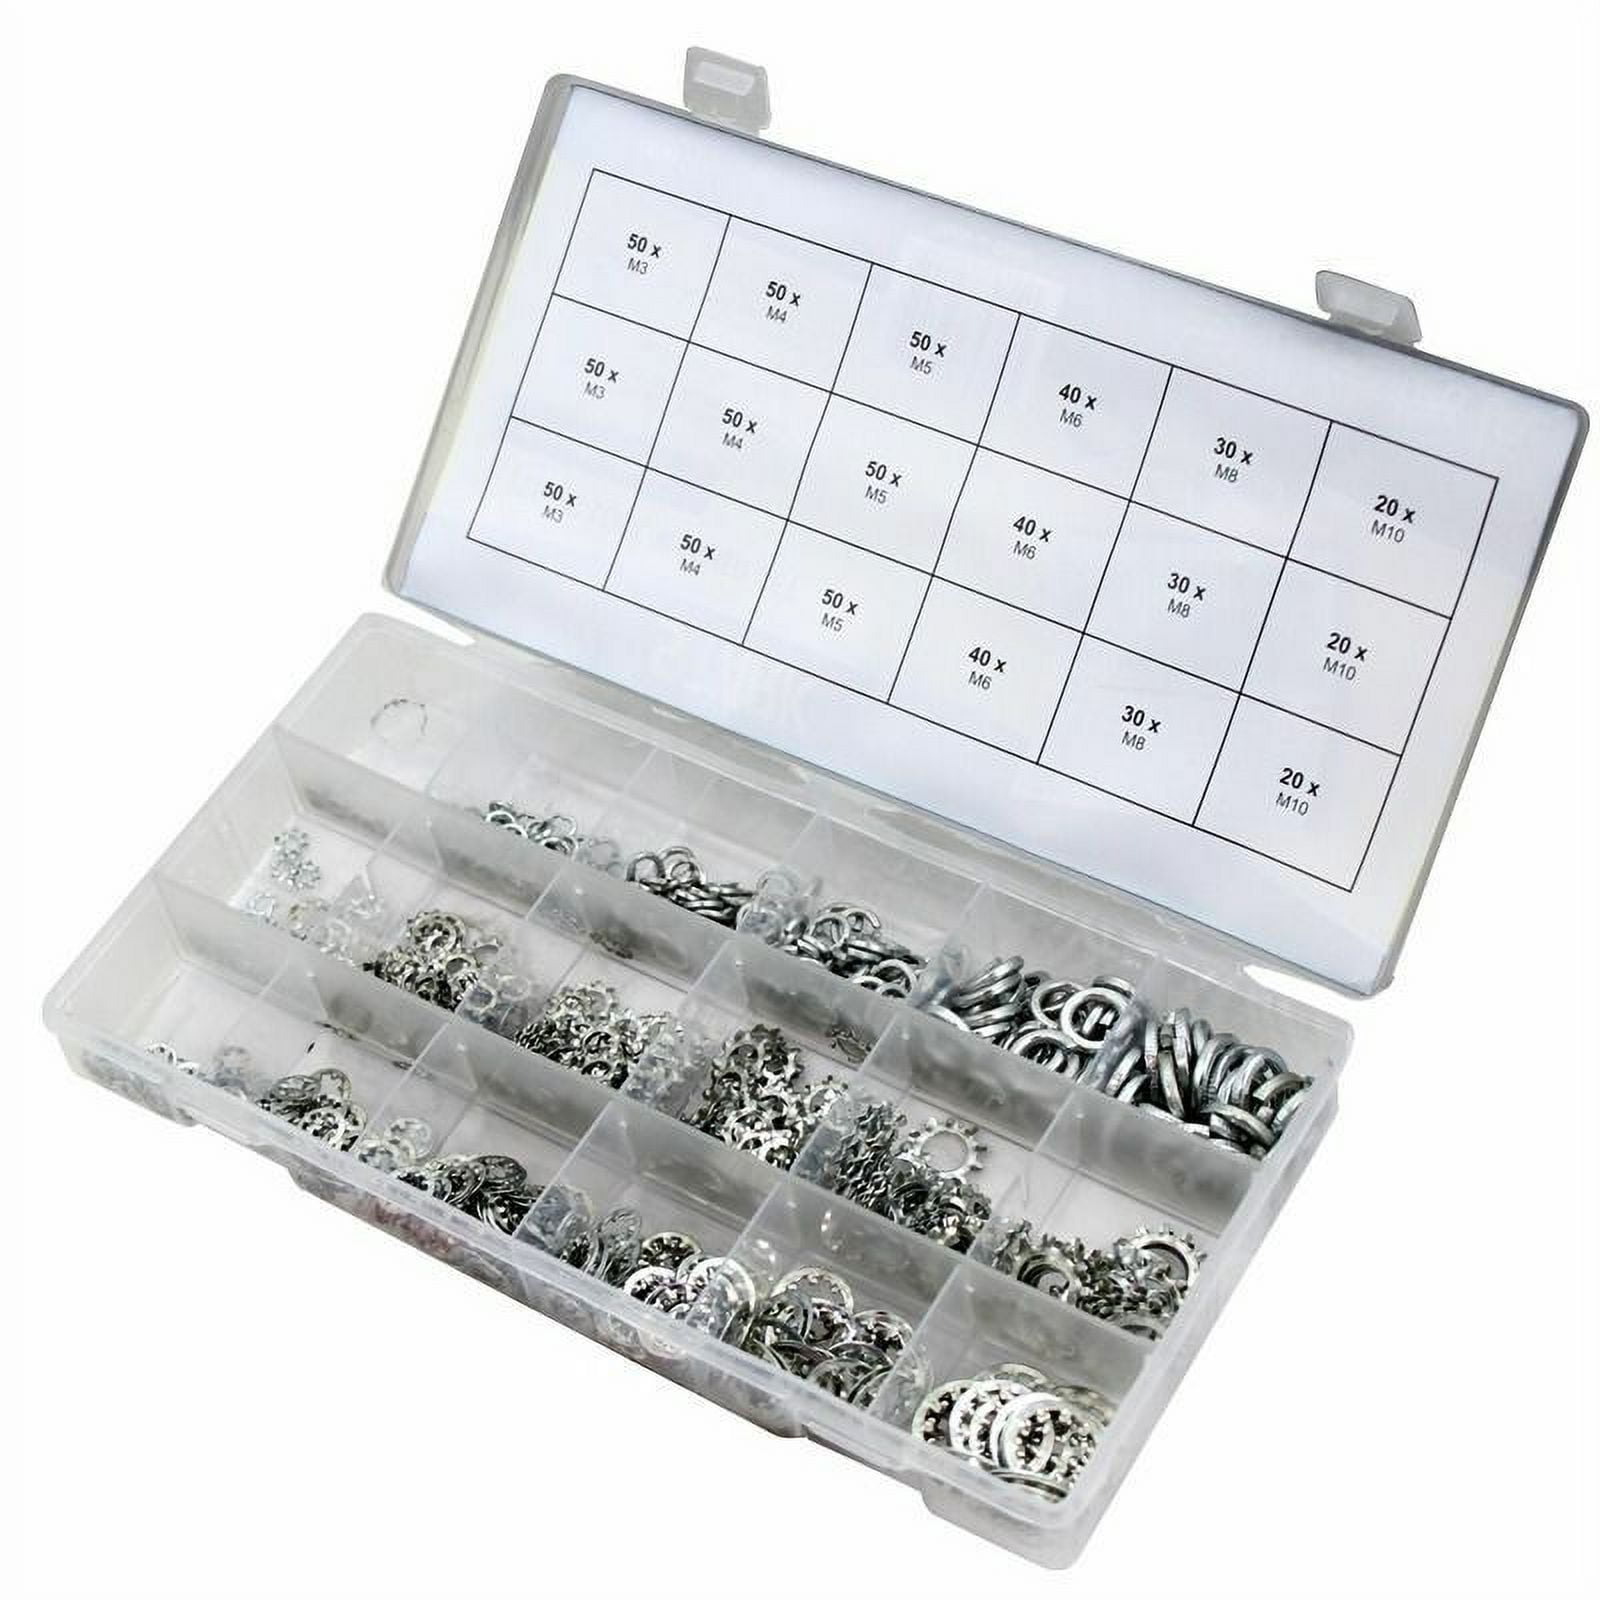 720pc Waher Lock Washer Assortment For The Most Common Nuts and Bolts ...